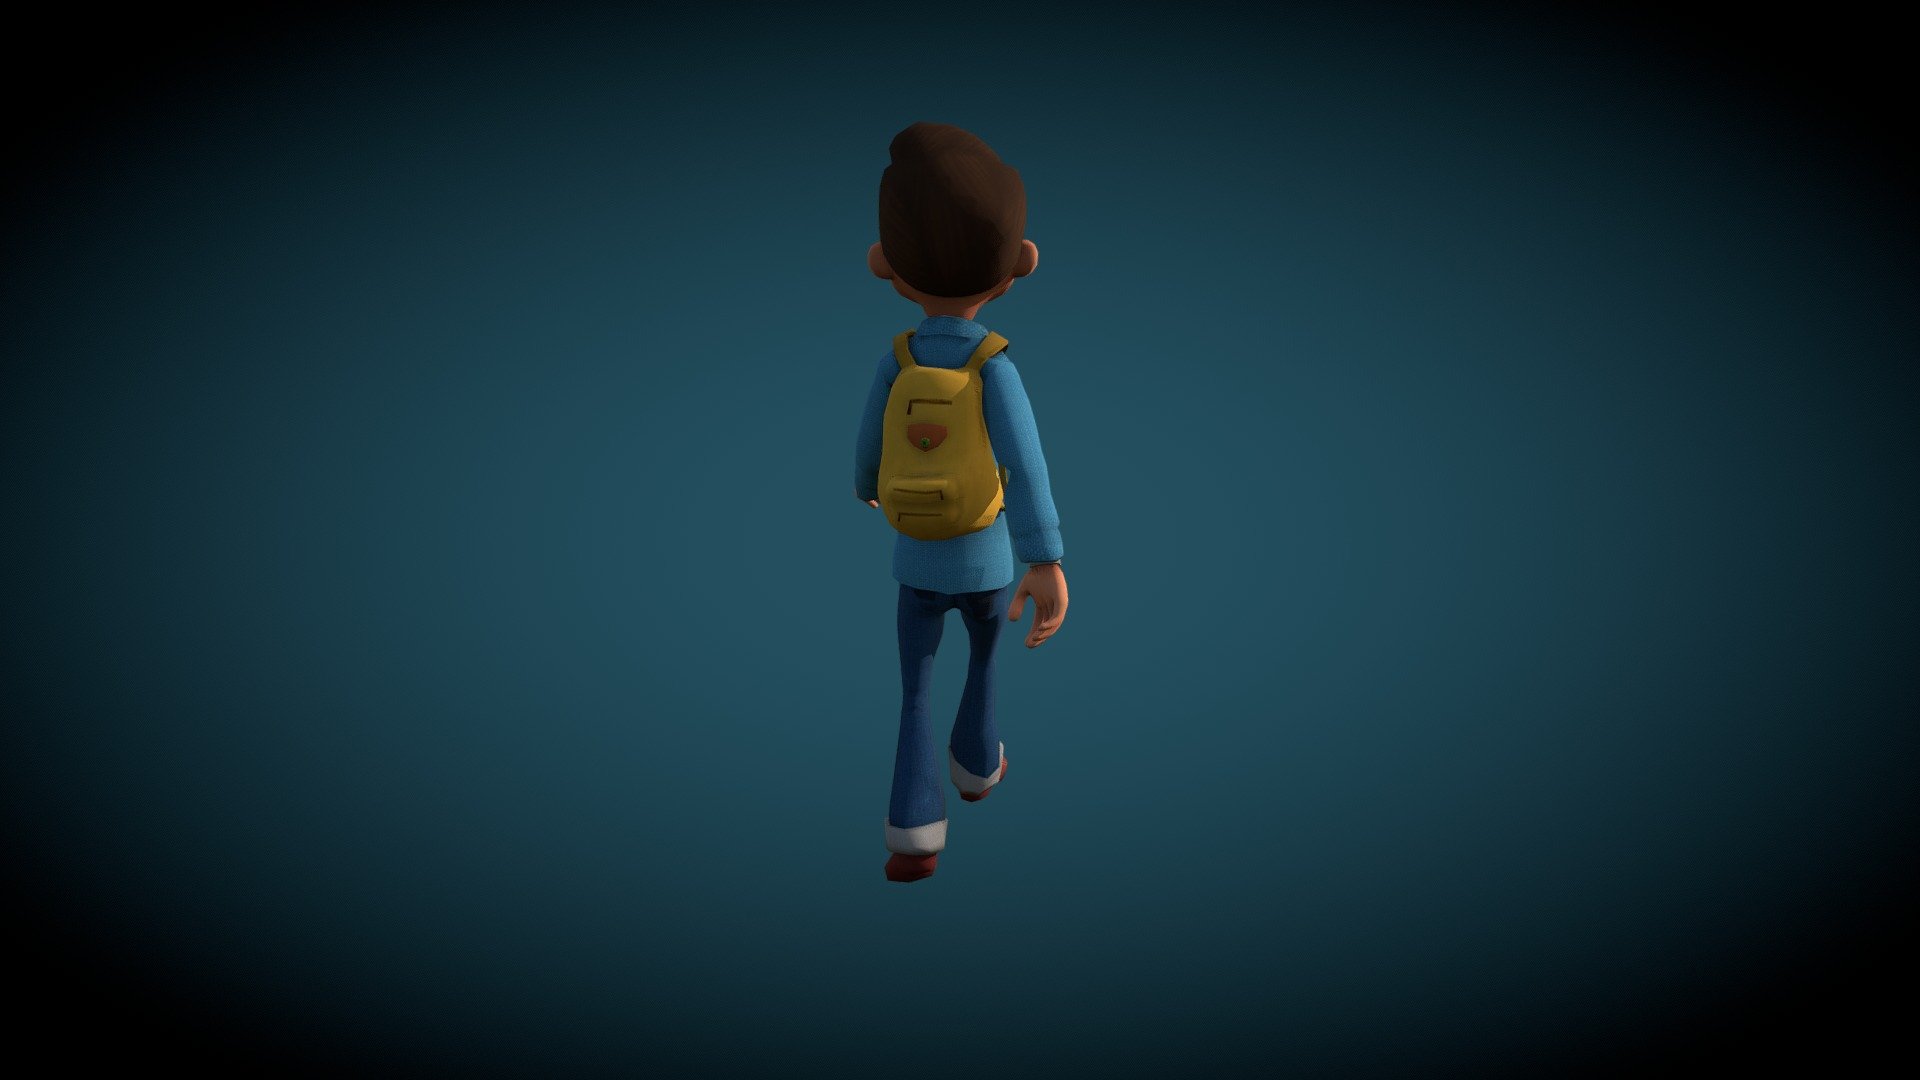 lowpoly cartoon boy rigged in 3dmax and maya includ runcycle and walkcycle
character animation : https://youtu.be/arOXIGaZoLc - Cartoon Boy2 - 3D model by hamed.gt3 3d model